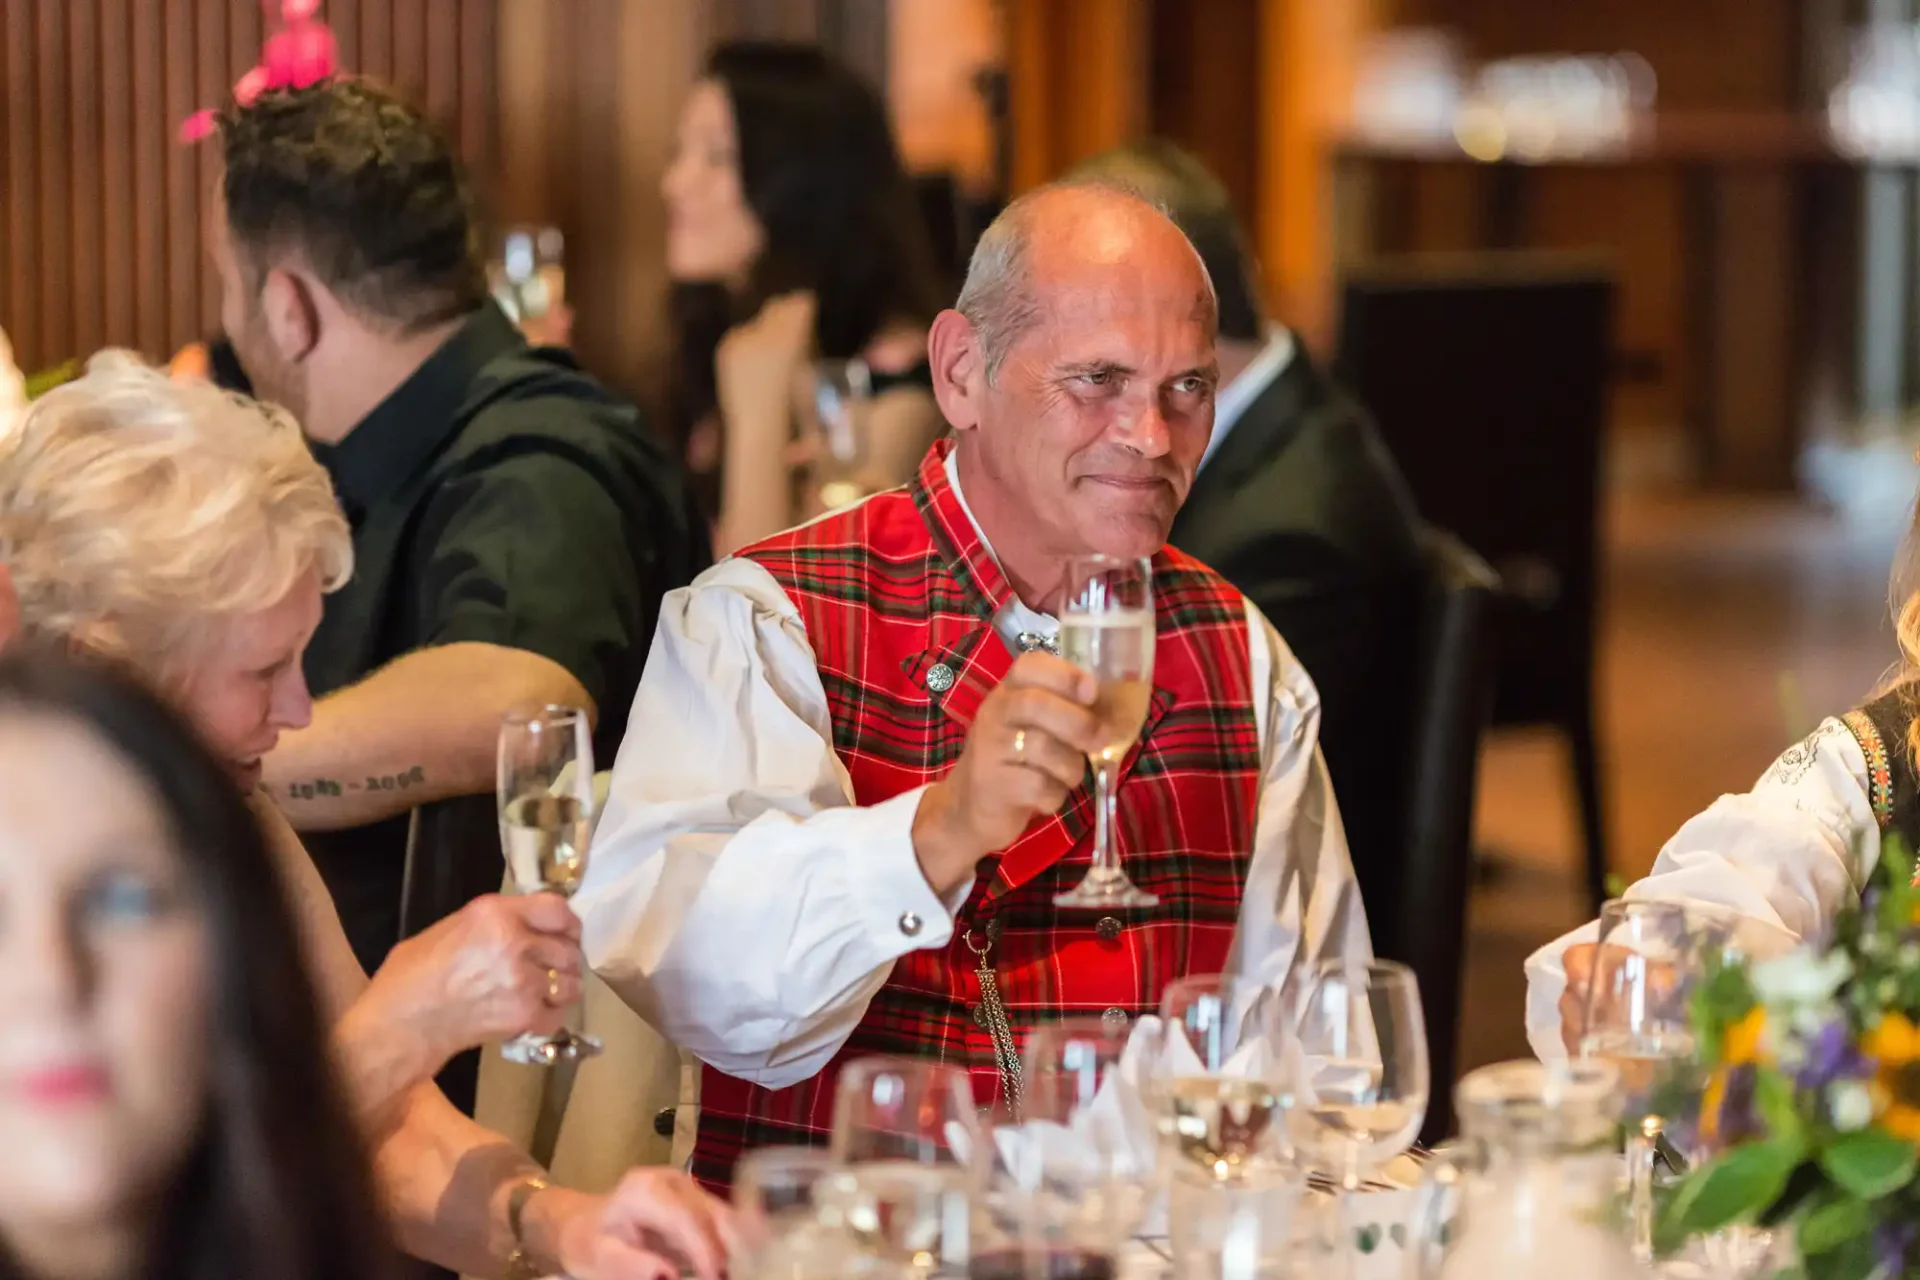 A man in a tartan plaid shirt raising a glass at a social event with guests sitting at tables in the background.